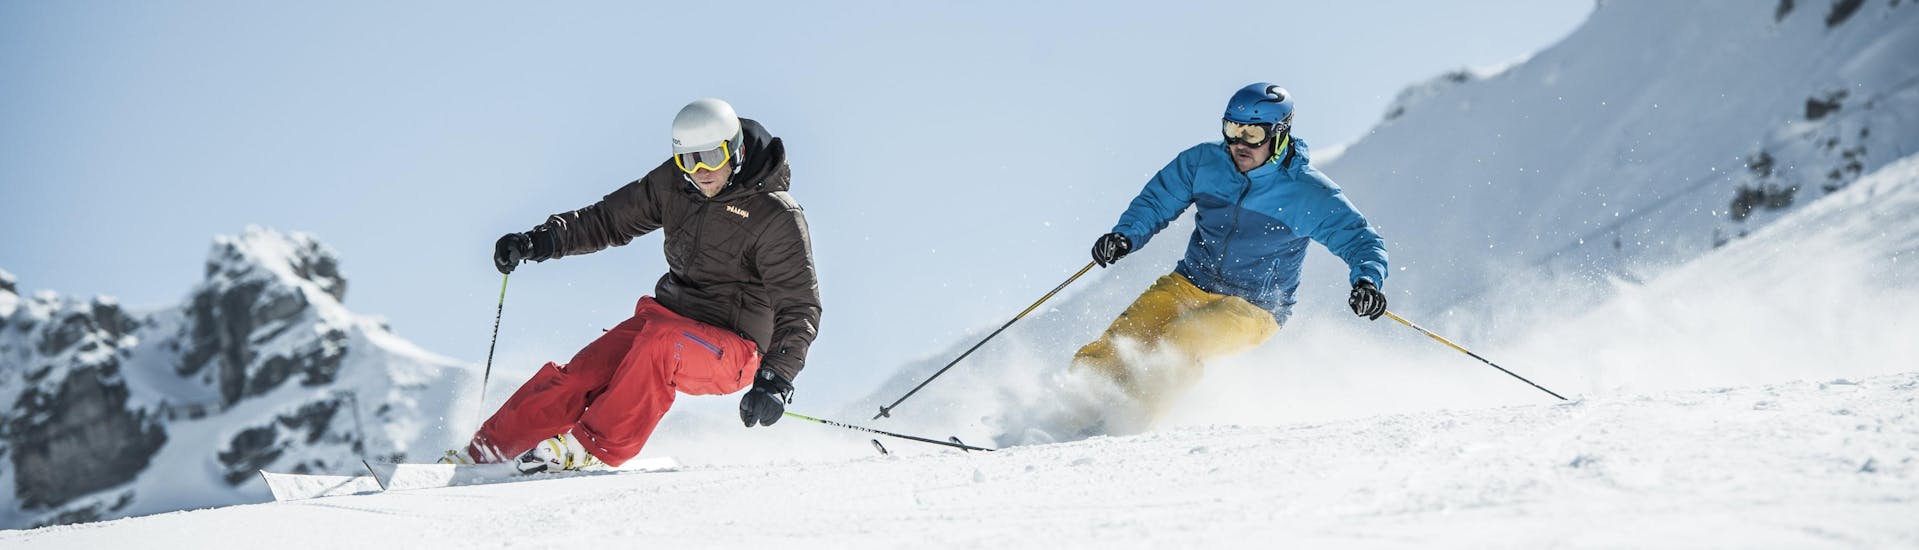 A skier practices the correct skiing technique during one of the private lessons in Lermoos-Grubigsteinbahn.